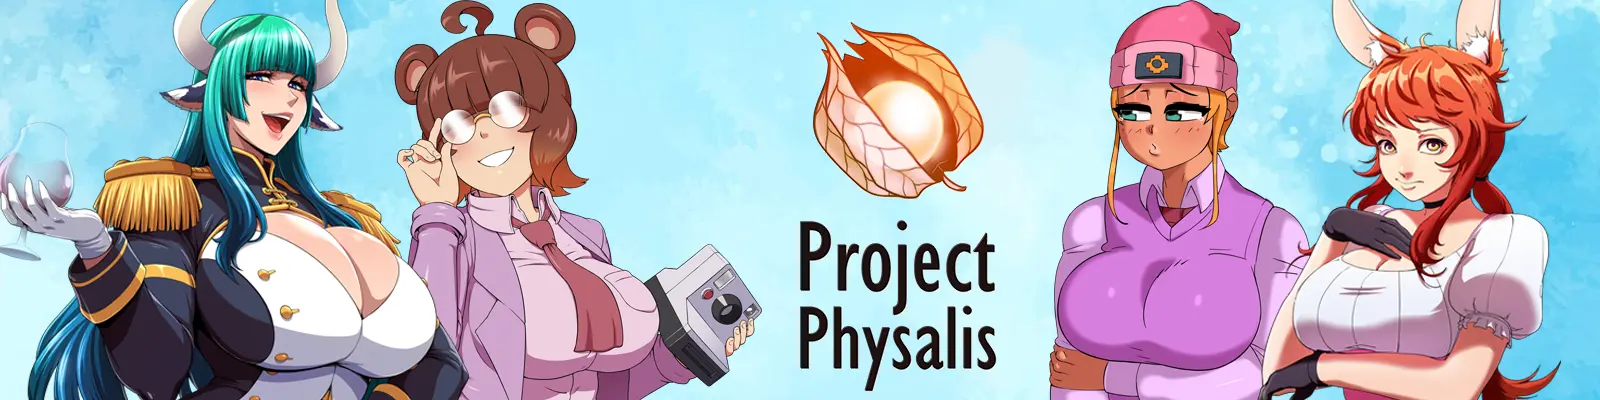 Project Physalis Game Collection main image